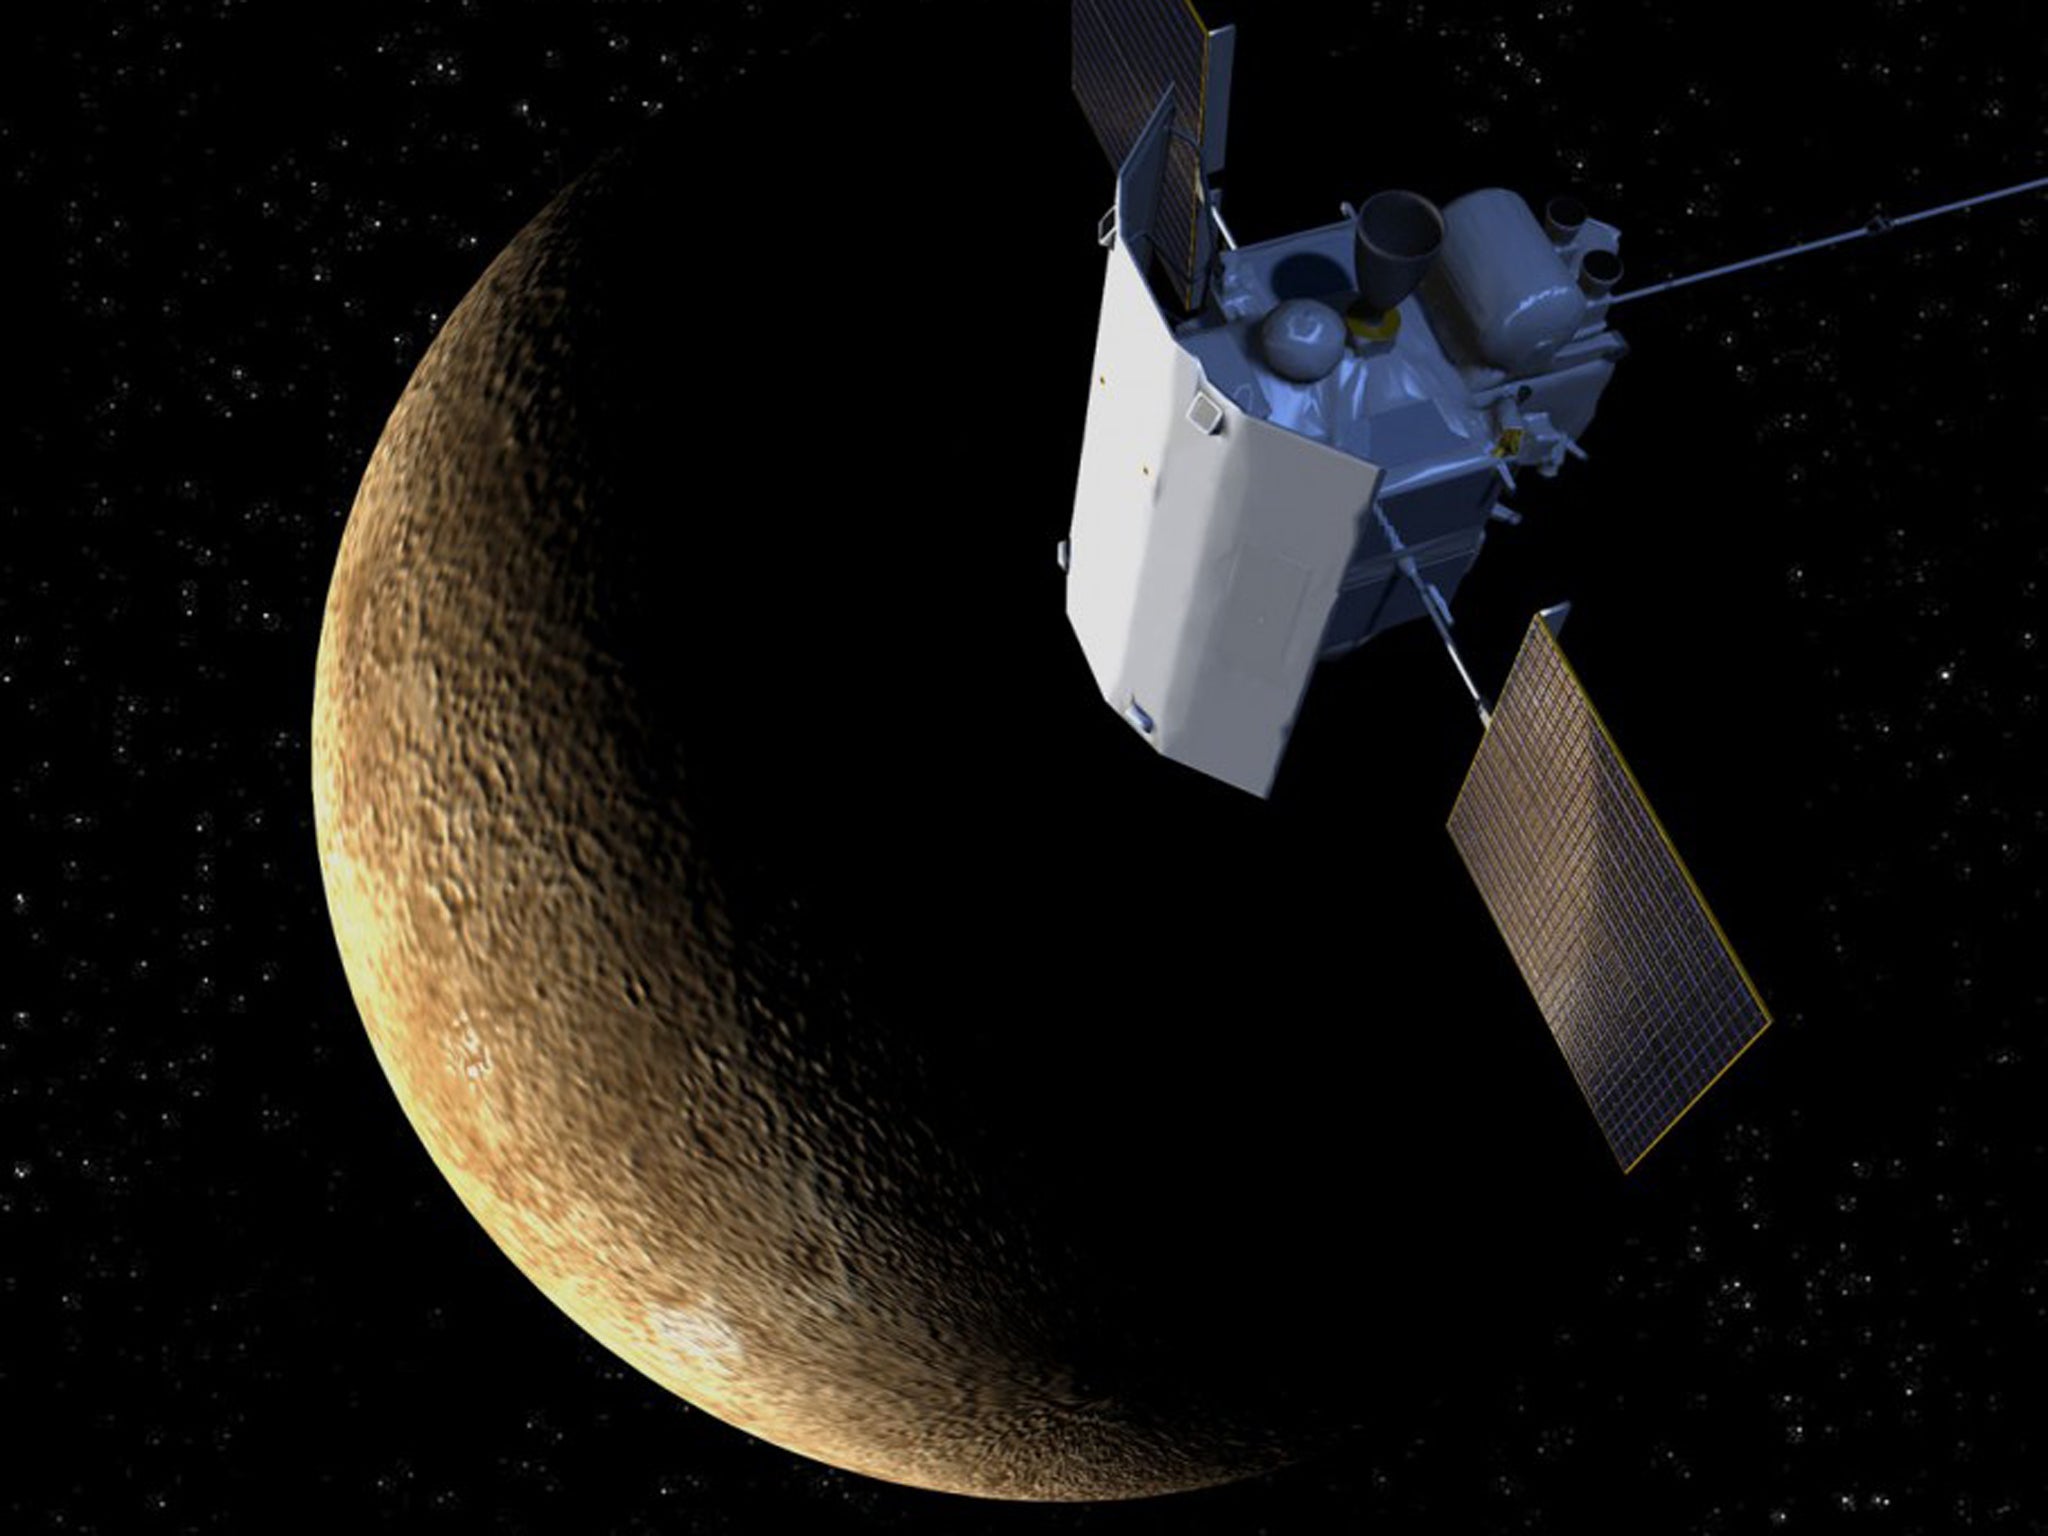 This artist’s rendering provided by the Johns Hopkins University Applied Physics Laboratory shows the sunshade on the MESSENGER spacecraft around the planet Mercury.